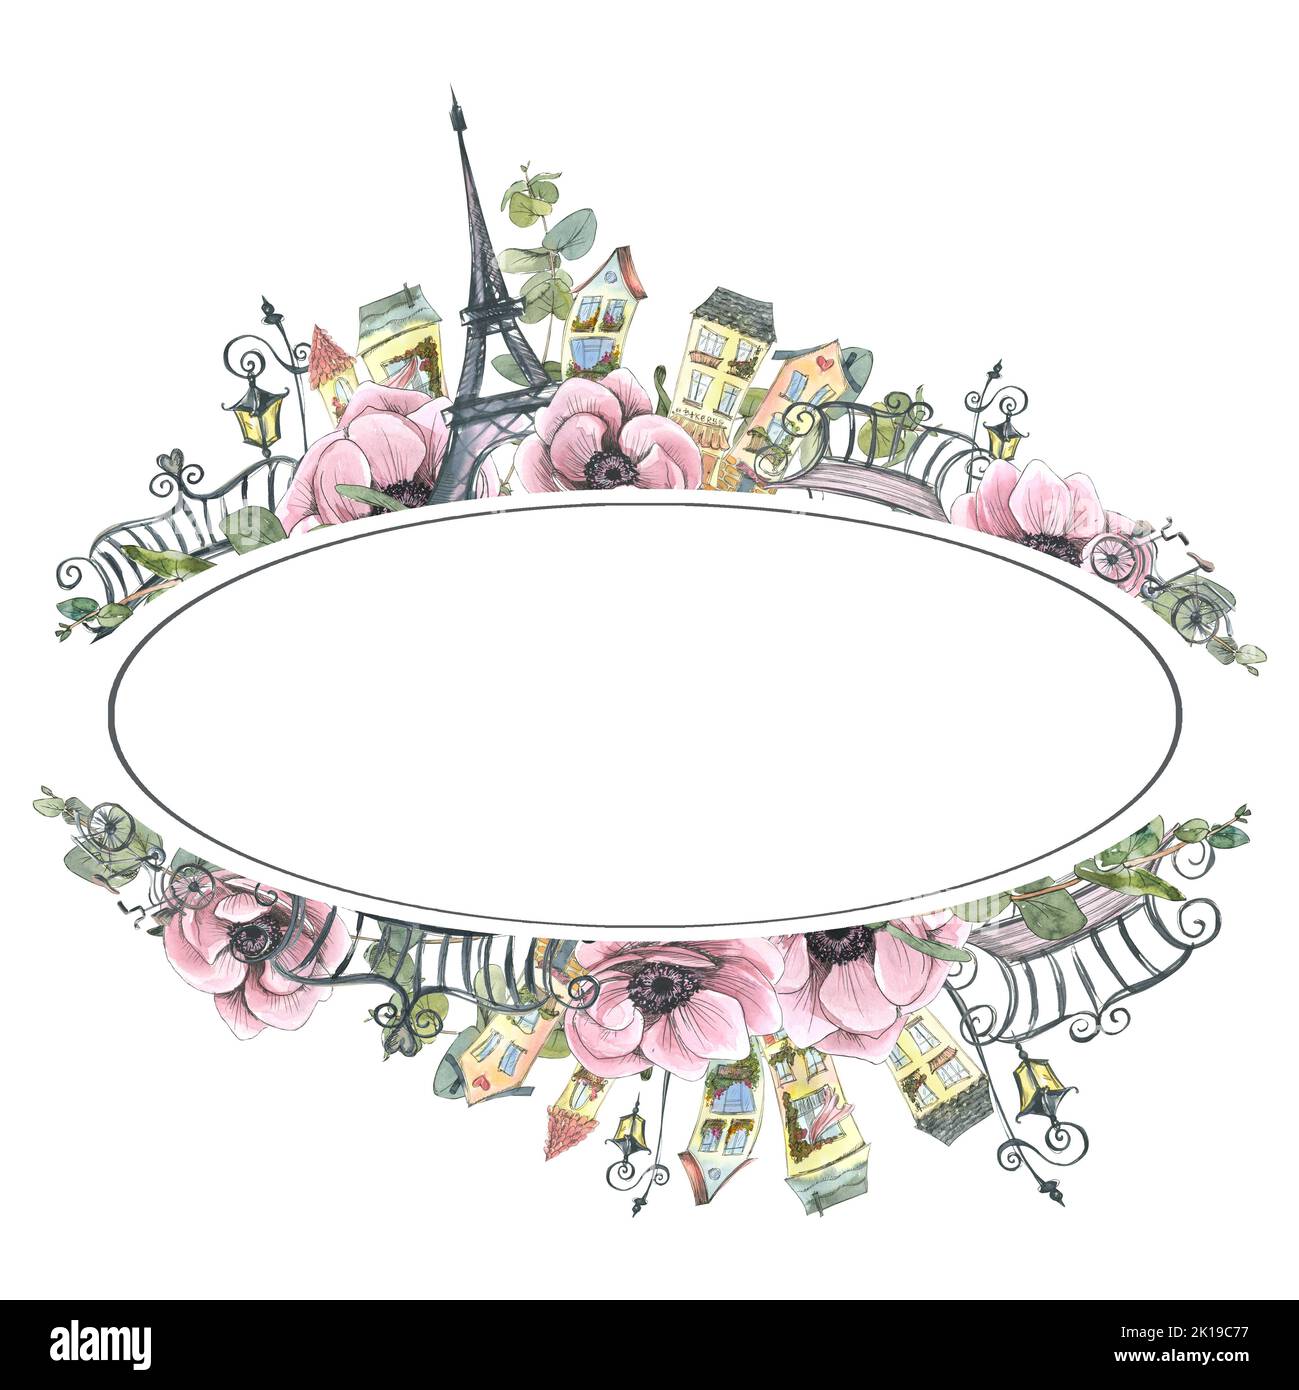 Oval frame with Eiffel tower, cute houses, anemone flowers. Watercolor illustration in sketch style with graphic elements. A board from a large set of Stock Photo